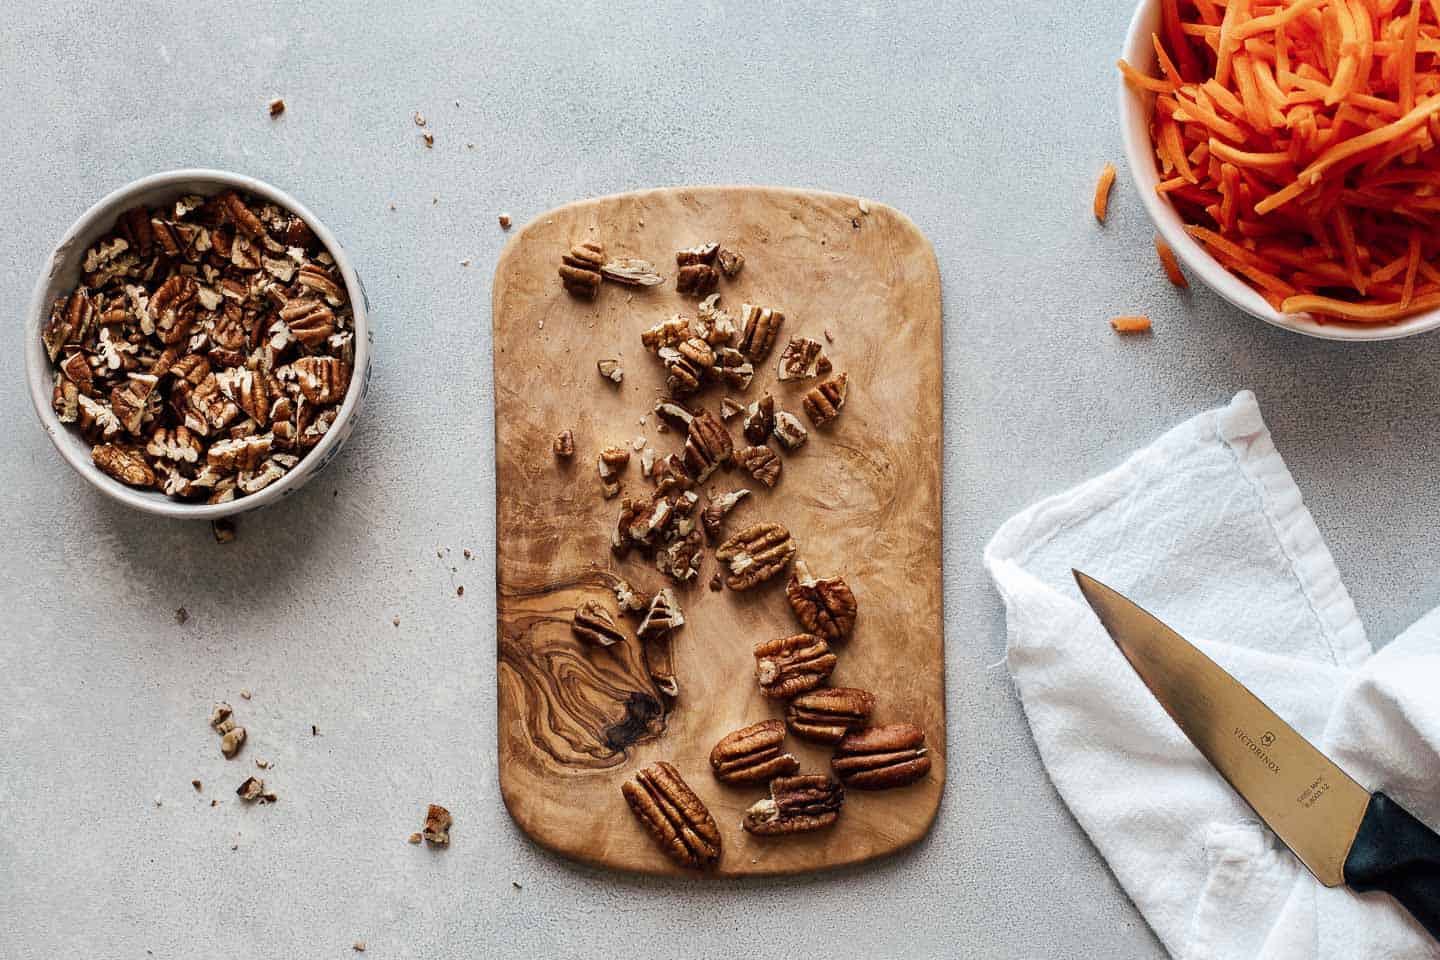 Pecans on a cutting board.